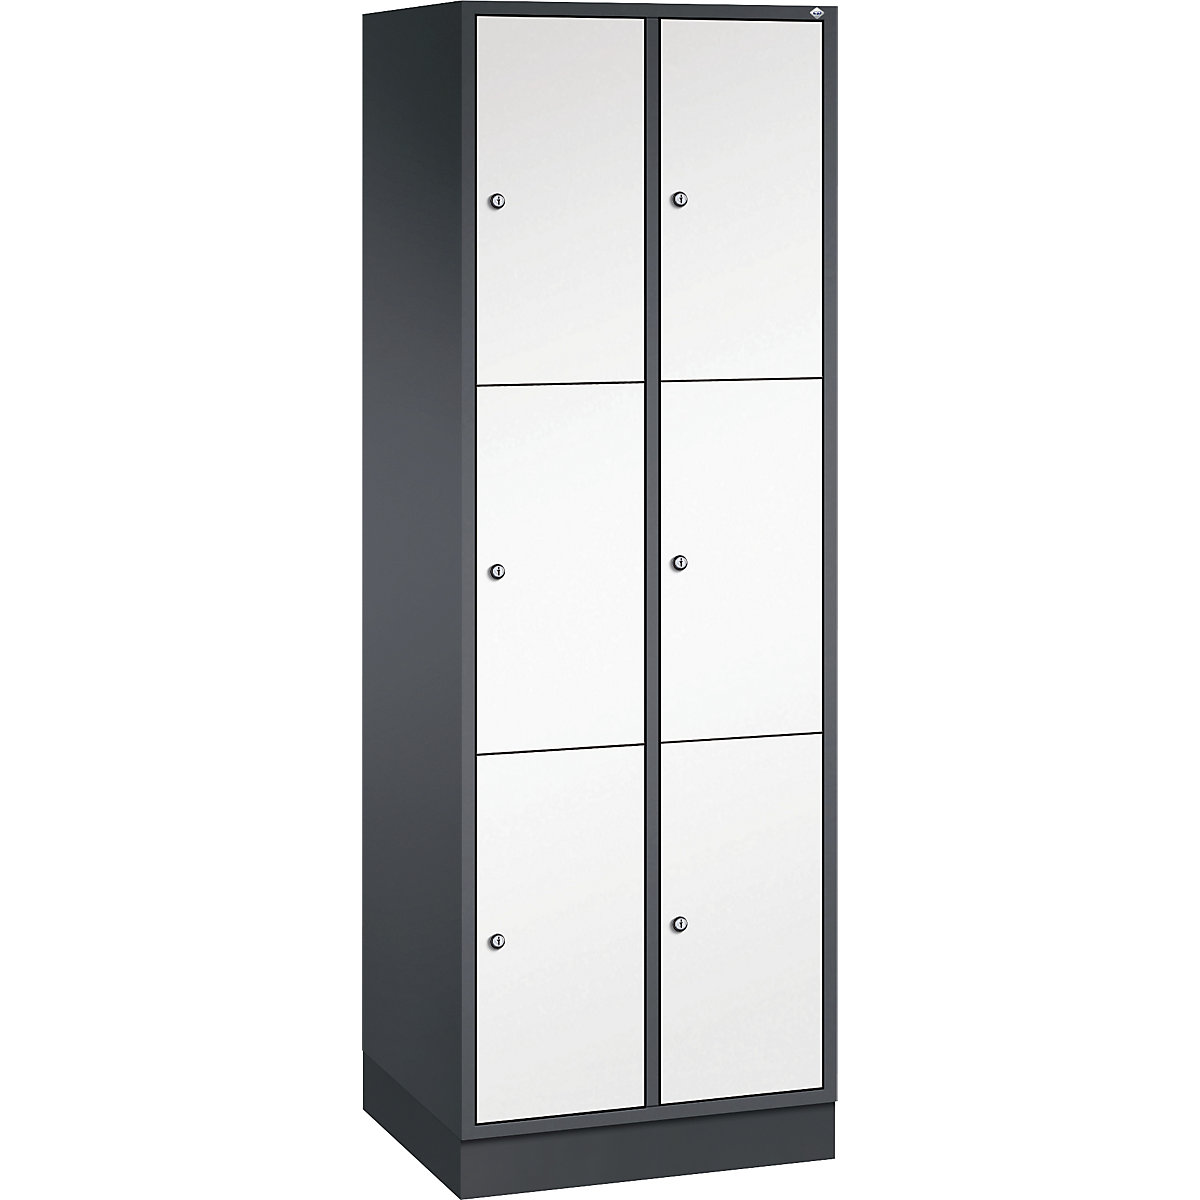 INTRO steel compartment locker, compartment height 580 mm – C+P, WxD 620 x 500 mm, 6 compartments, black grey body, pure white doors